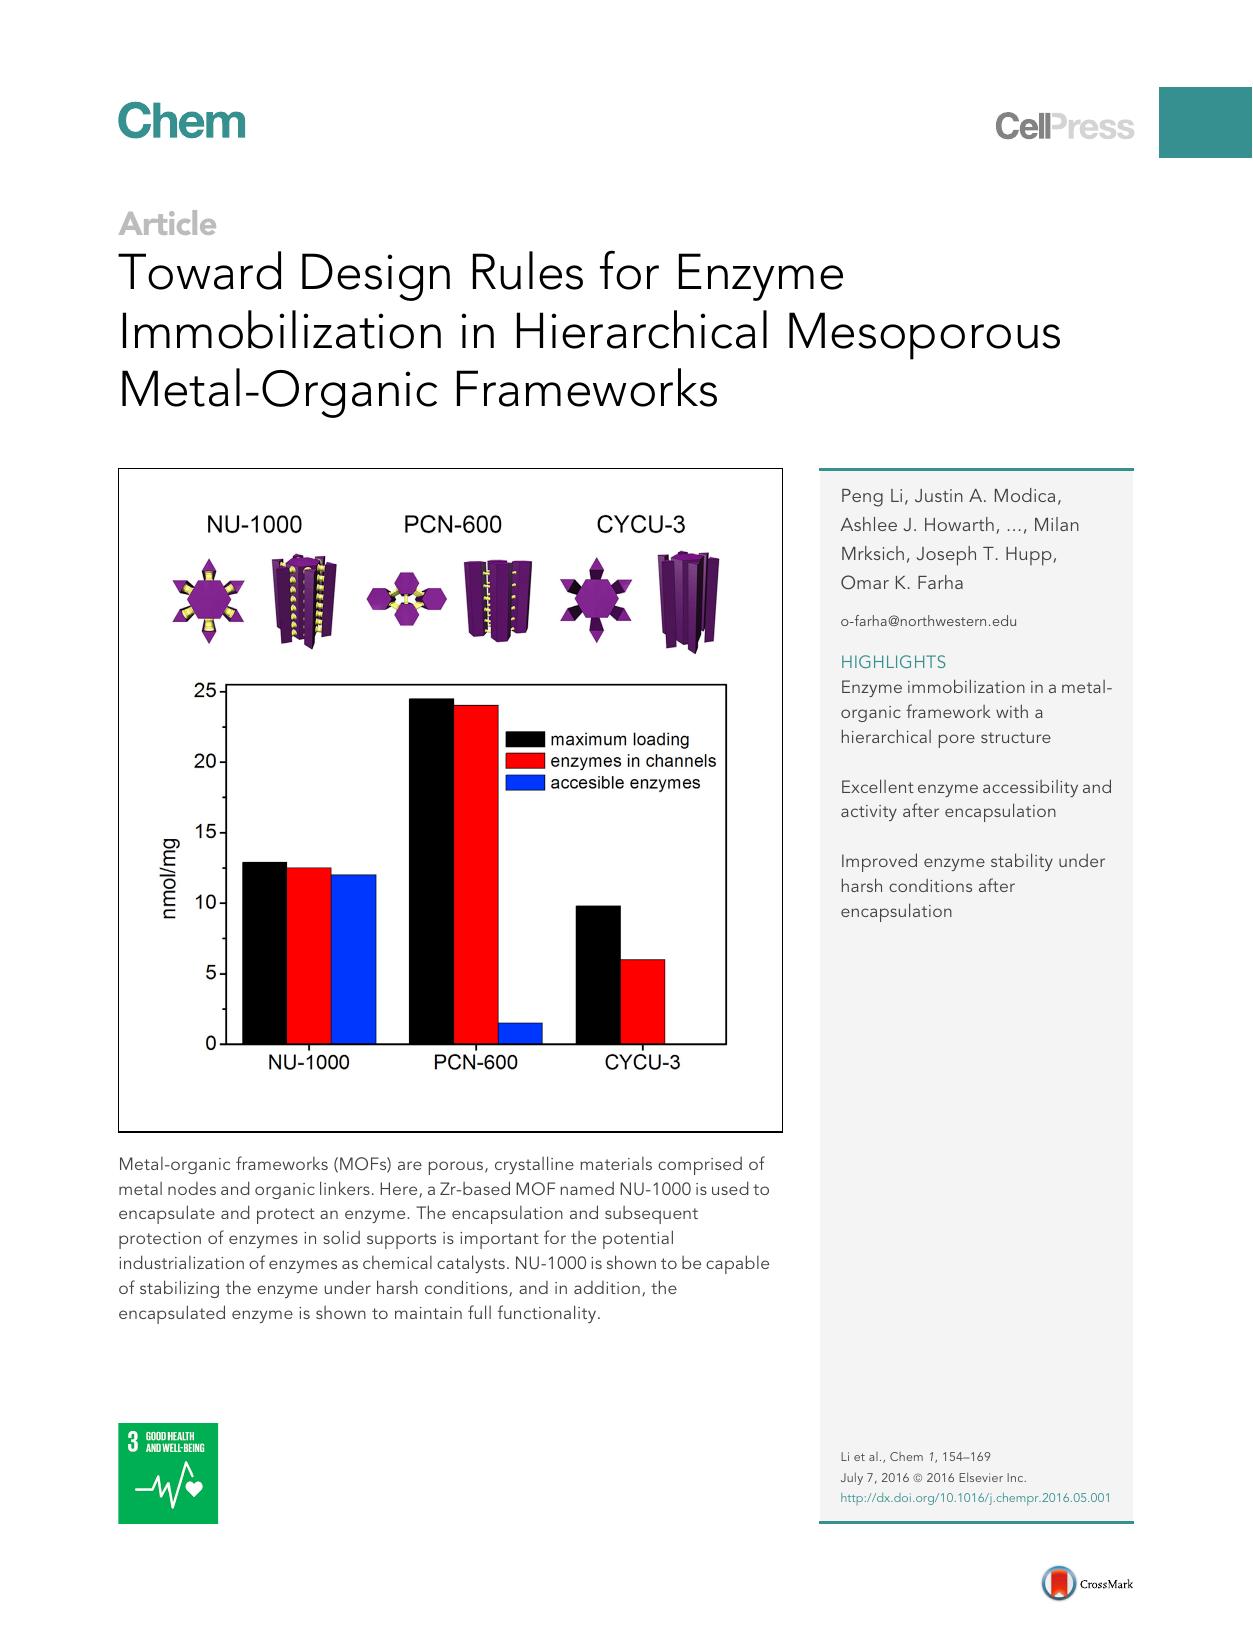 Toward Design Rules for Enzyme Immobilization in Hierarchical Mesoporous Metal-Organic Frameworks by unknow